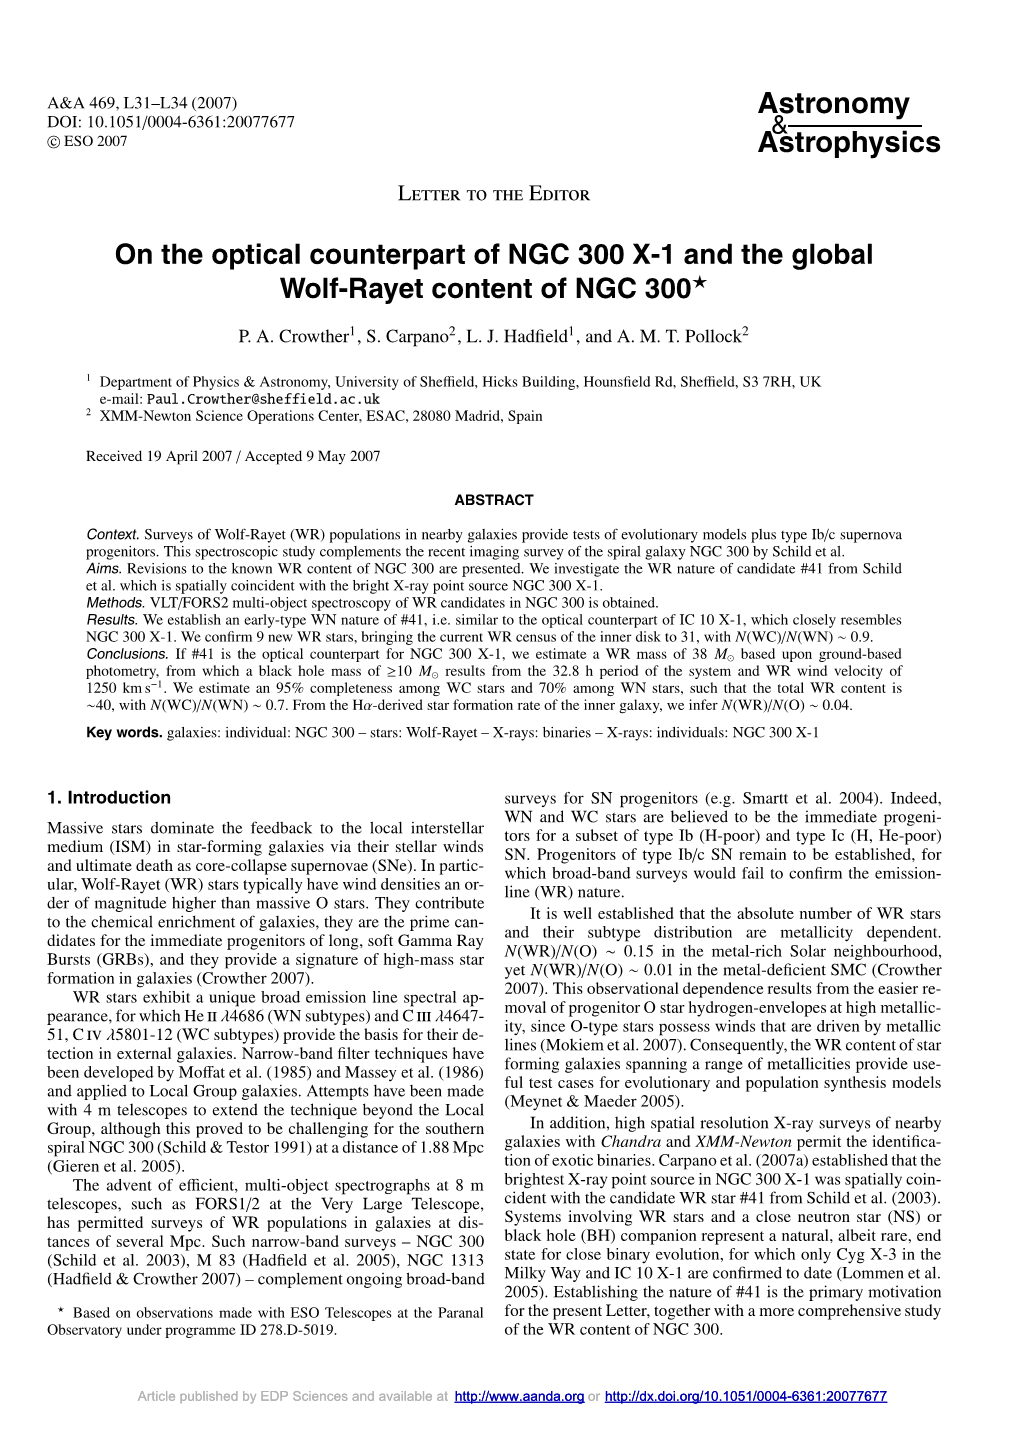 On the Optical Counterpart of NGC 300 X-1 and the Global Wolf-Rayet Content of NGC 300